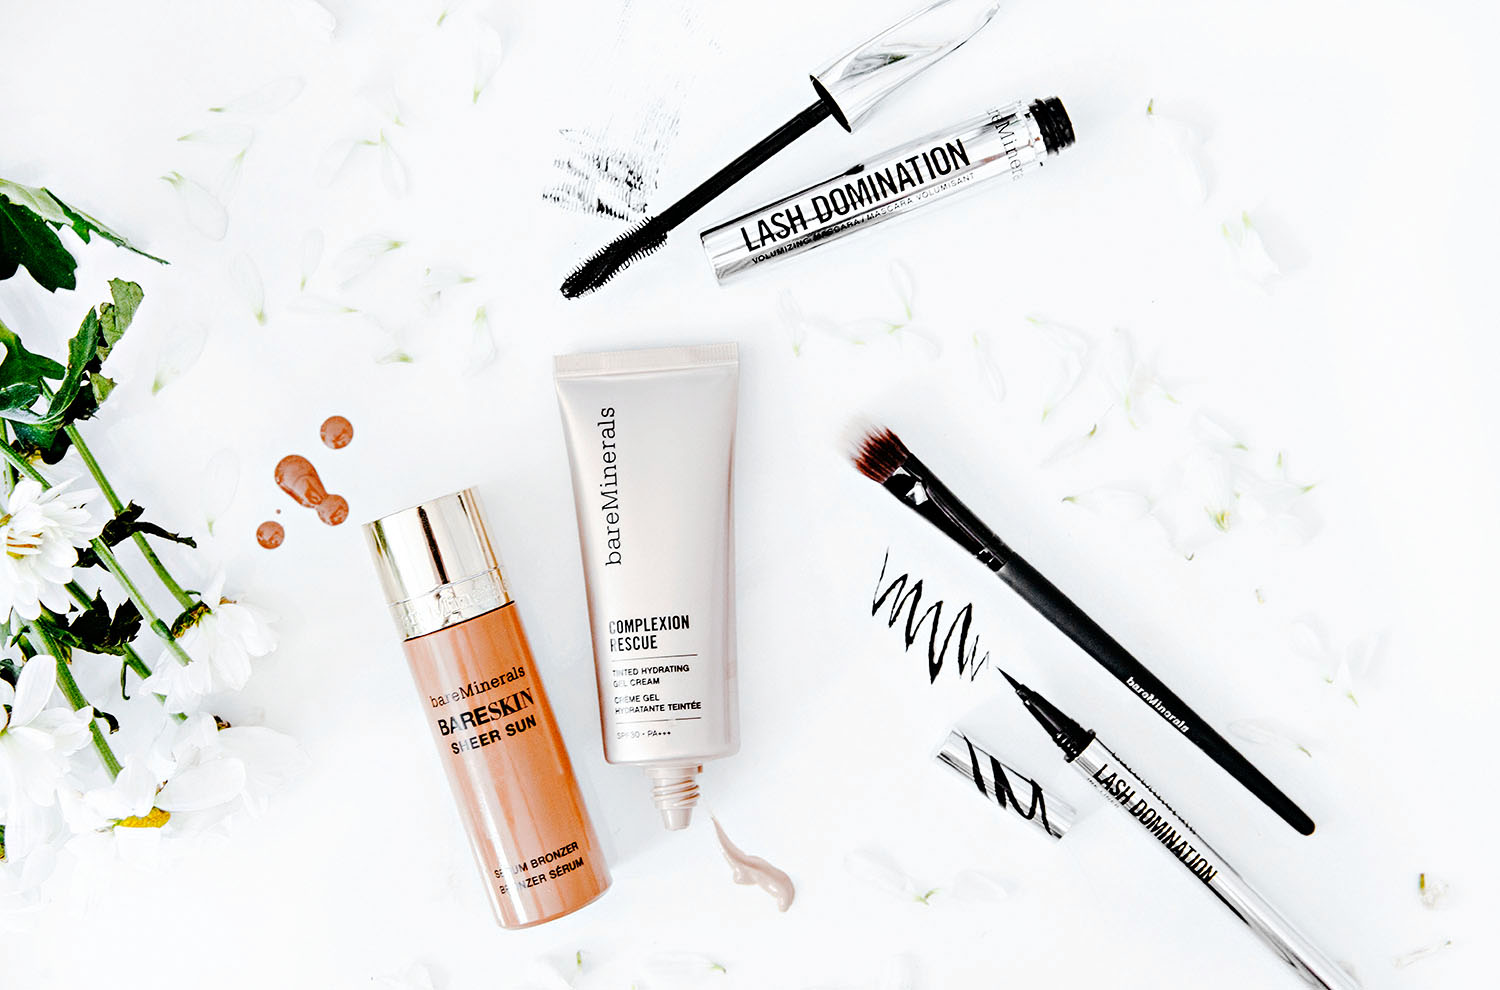 Makeup products from BareMinerals